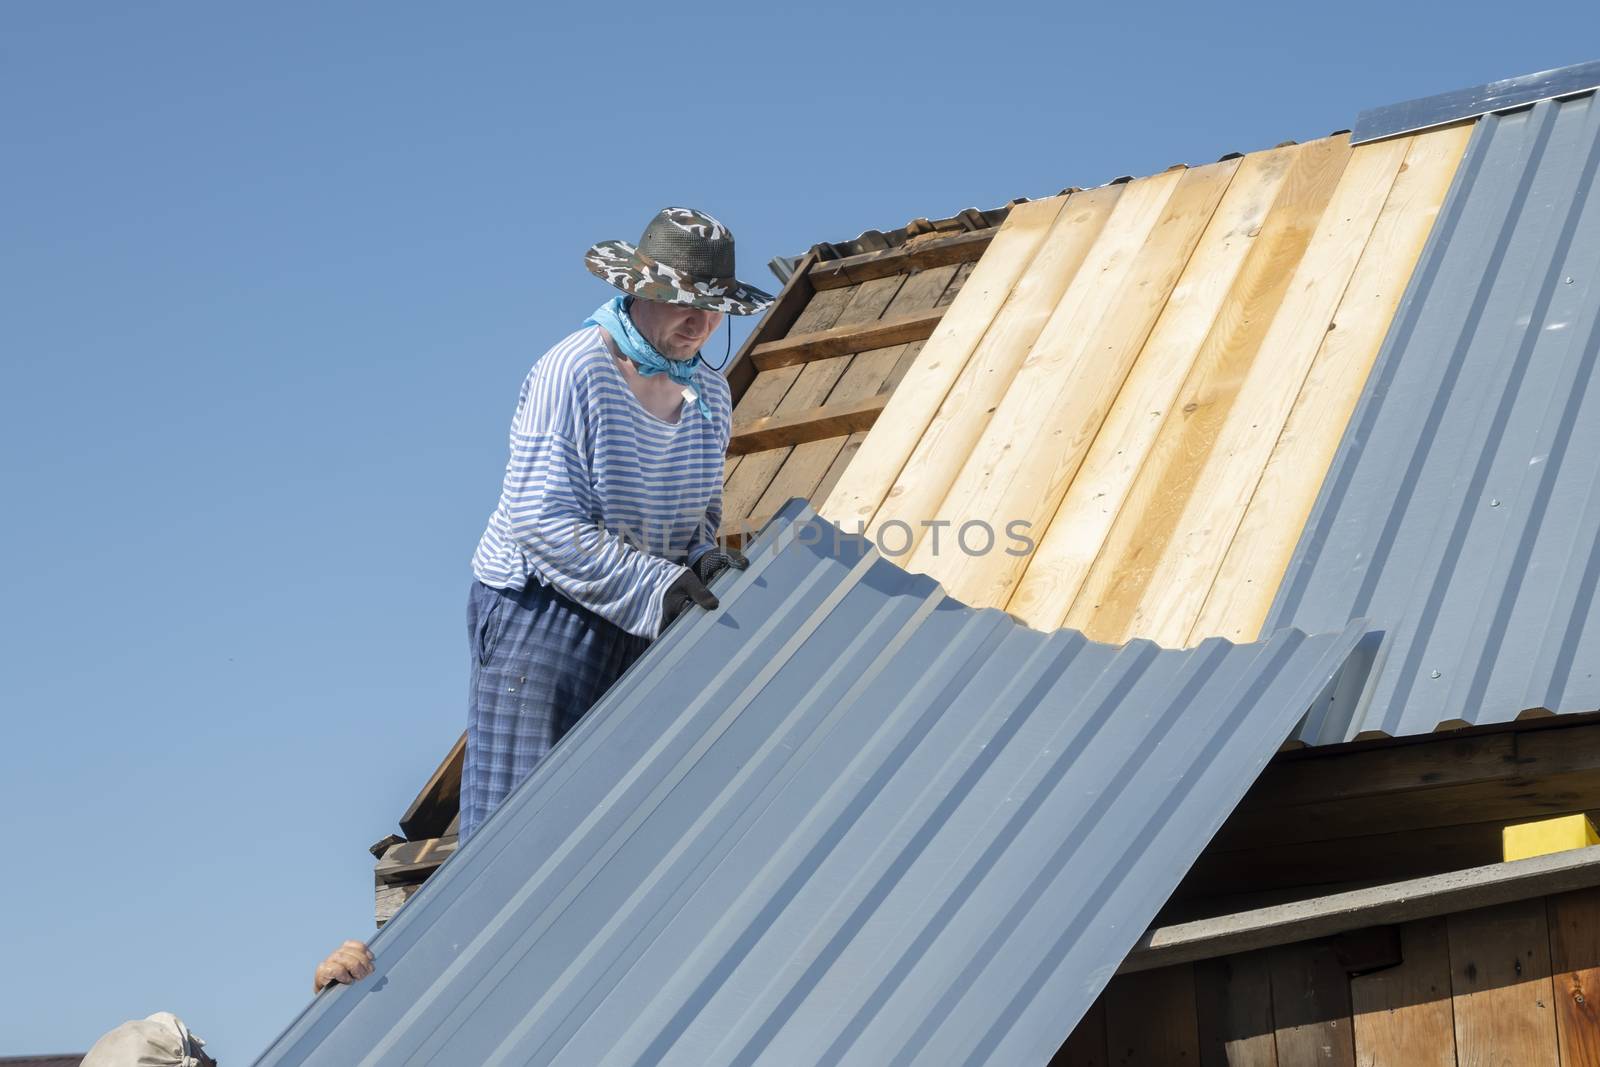 Builder lifts, holds roofing iron to repair the roof by jk3030